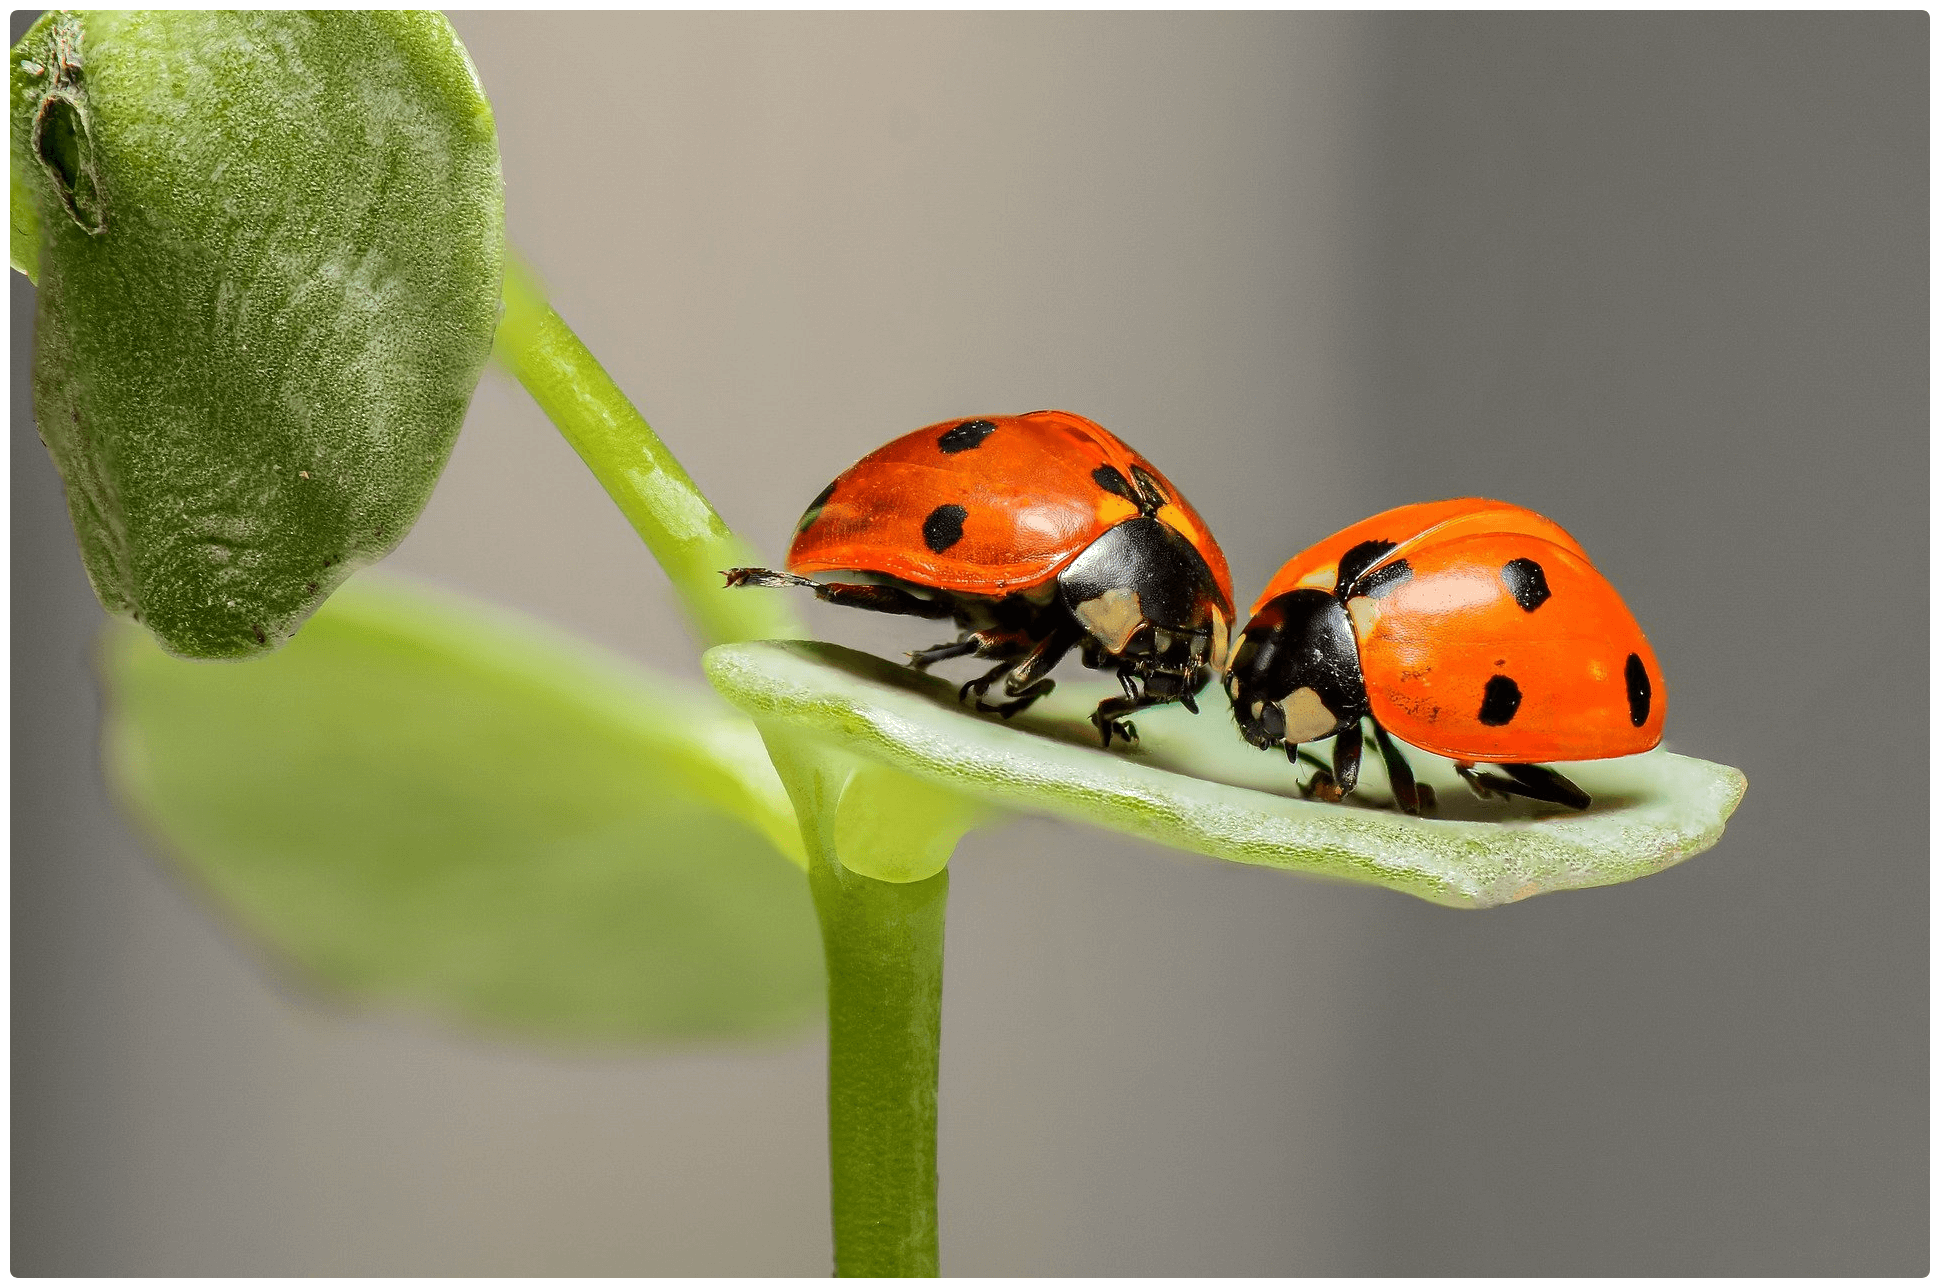 Two ladybirds on a leaf.